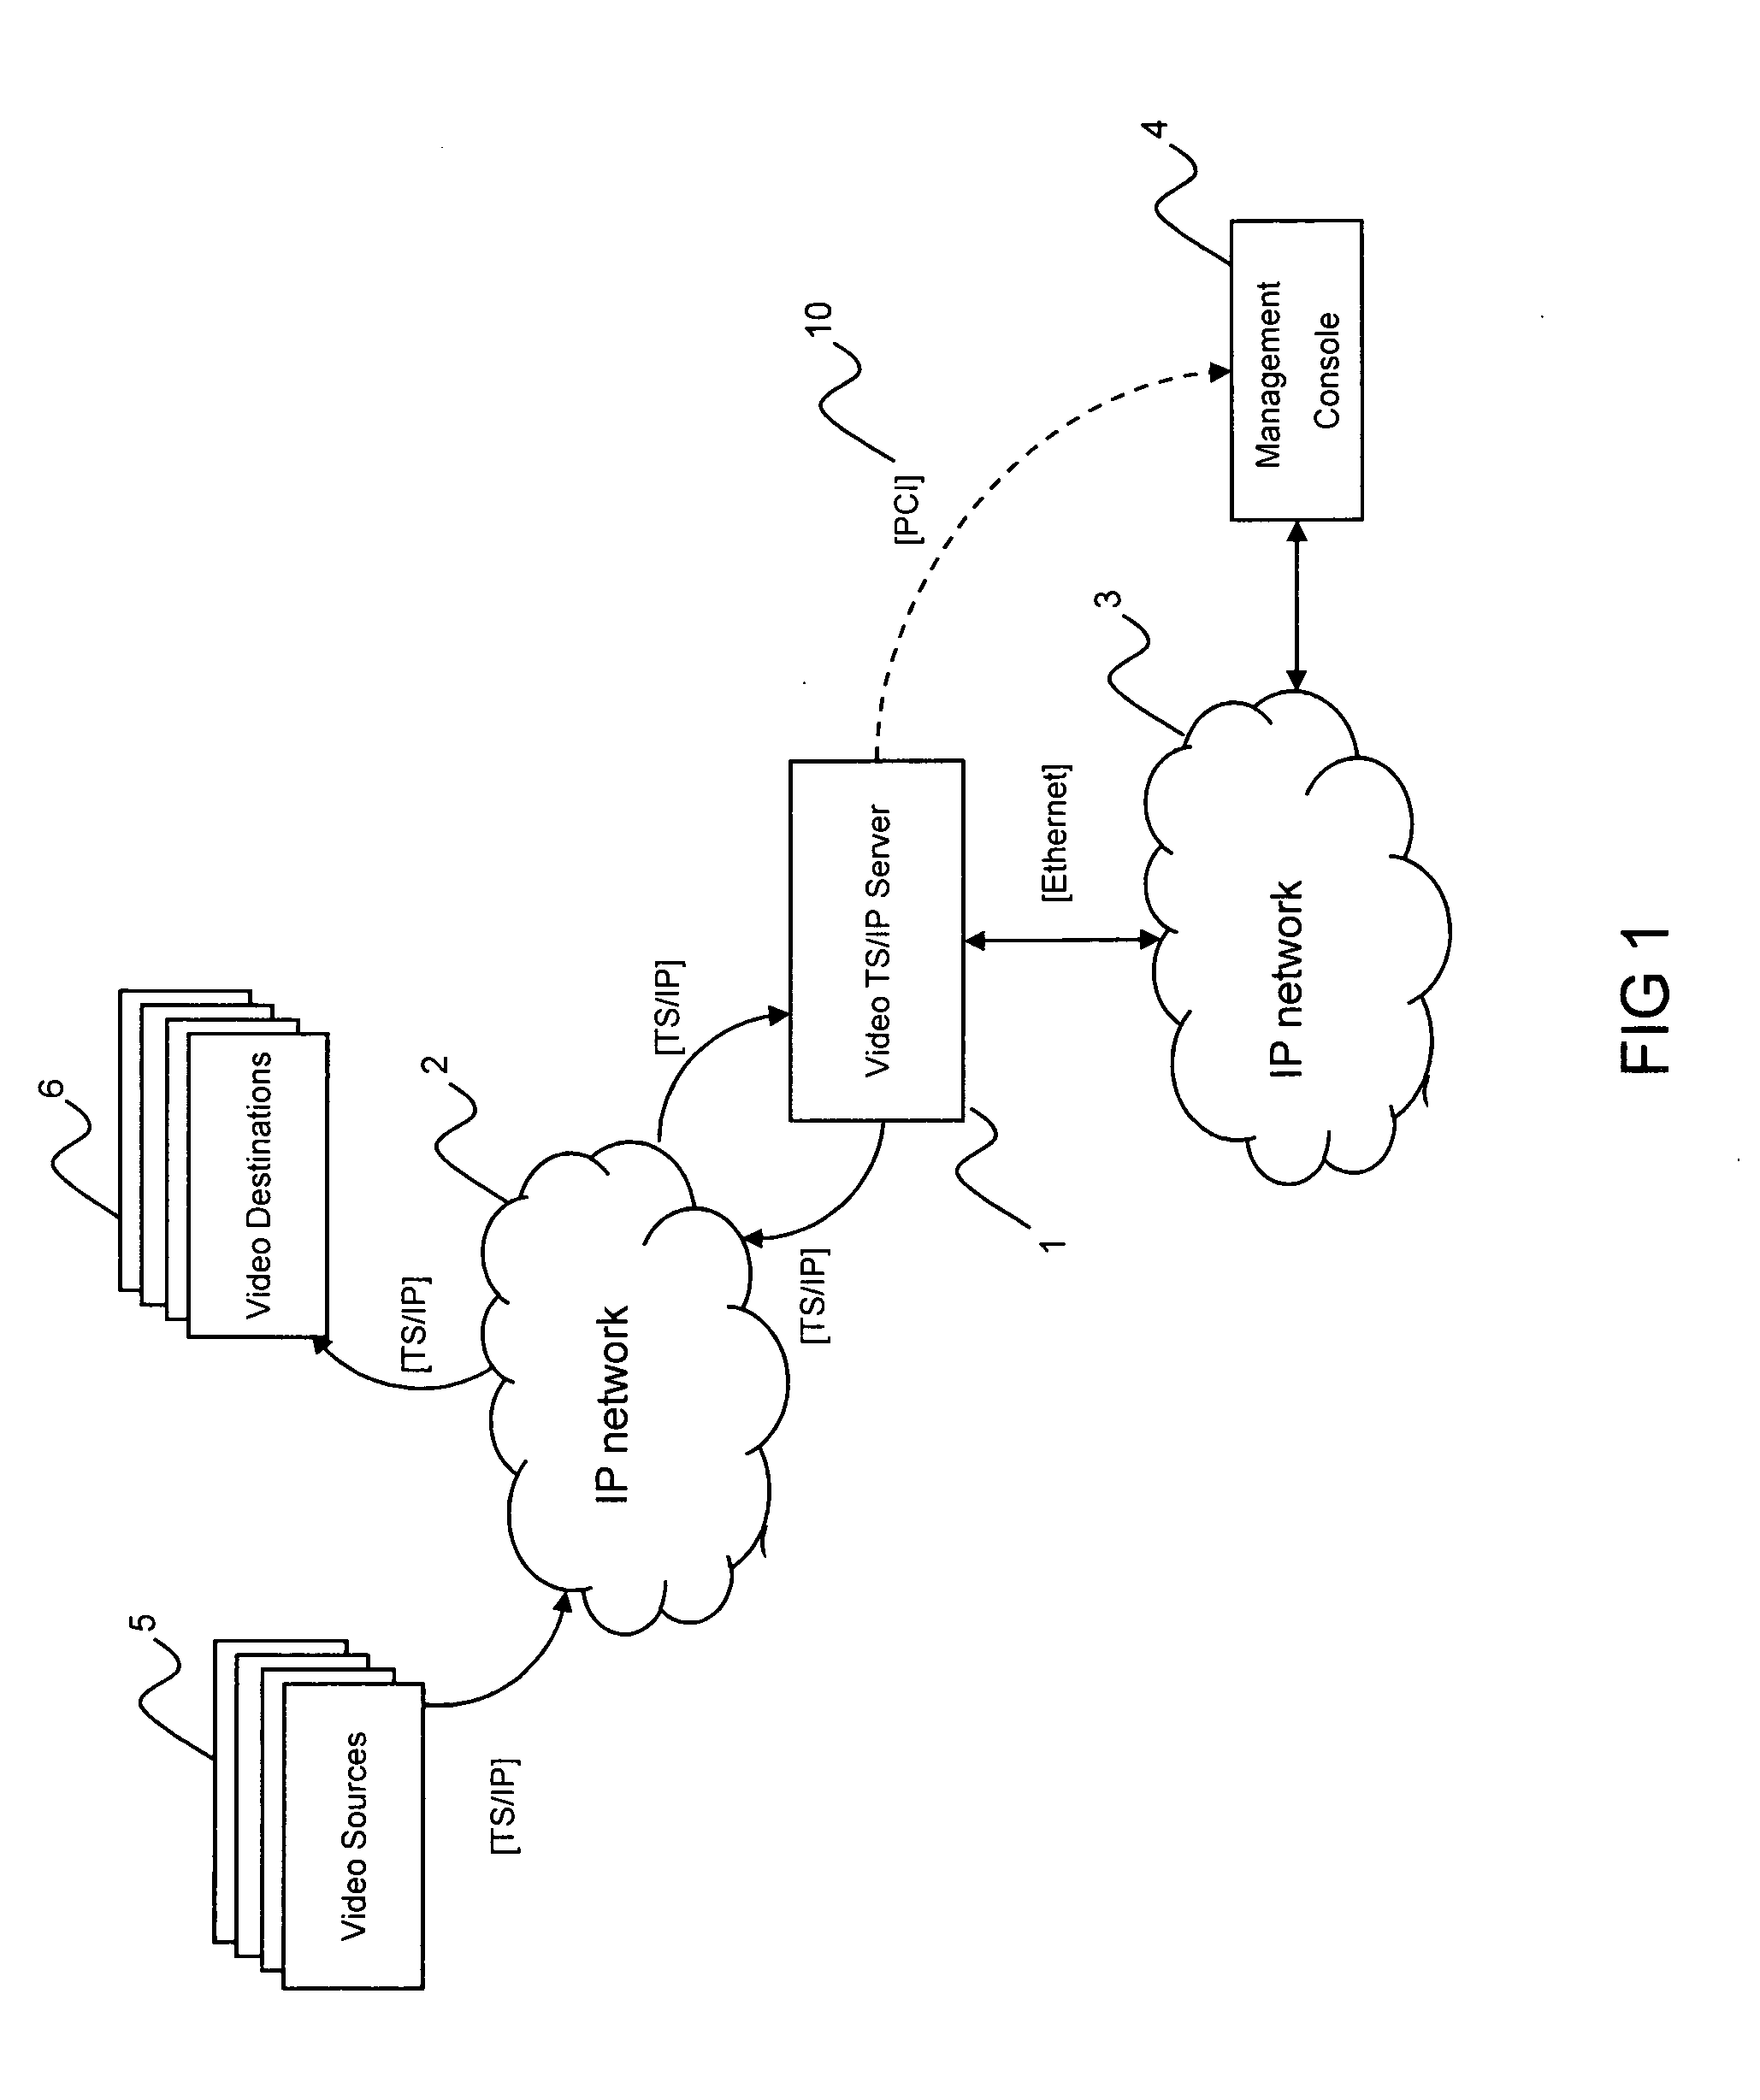 Switchable multi-channel data transcoding and transrating system